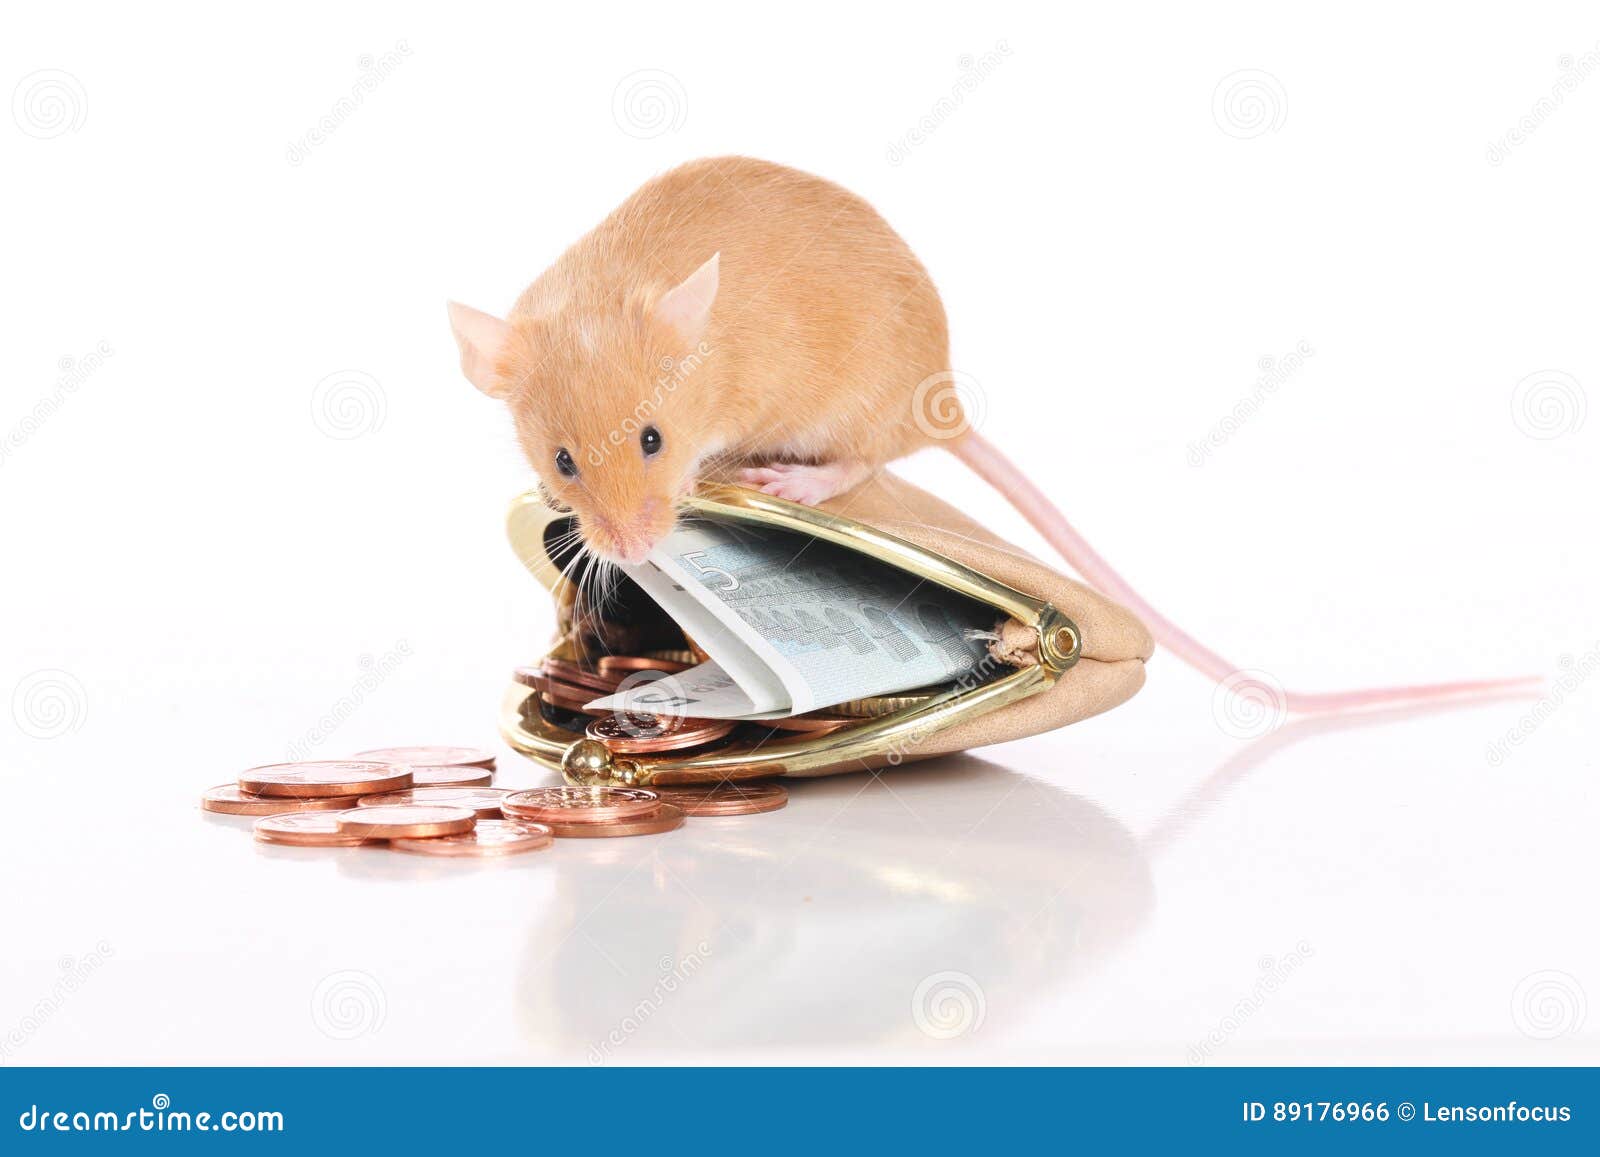 Mouse with a Small Purse and Pocket Money Stock Photo - Image of finance,  note: 89176966